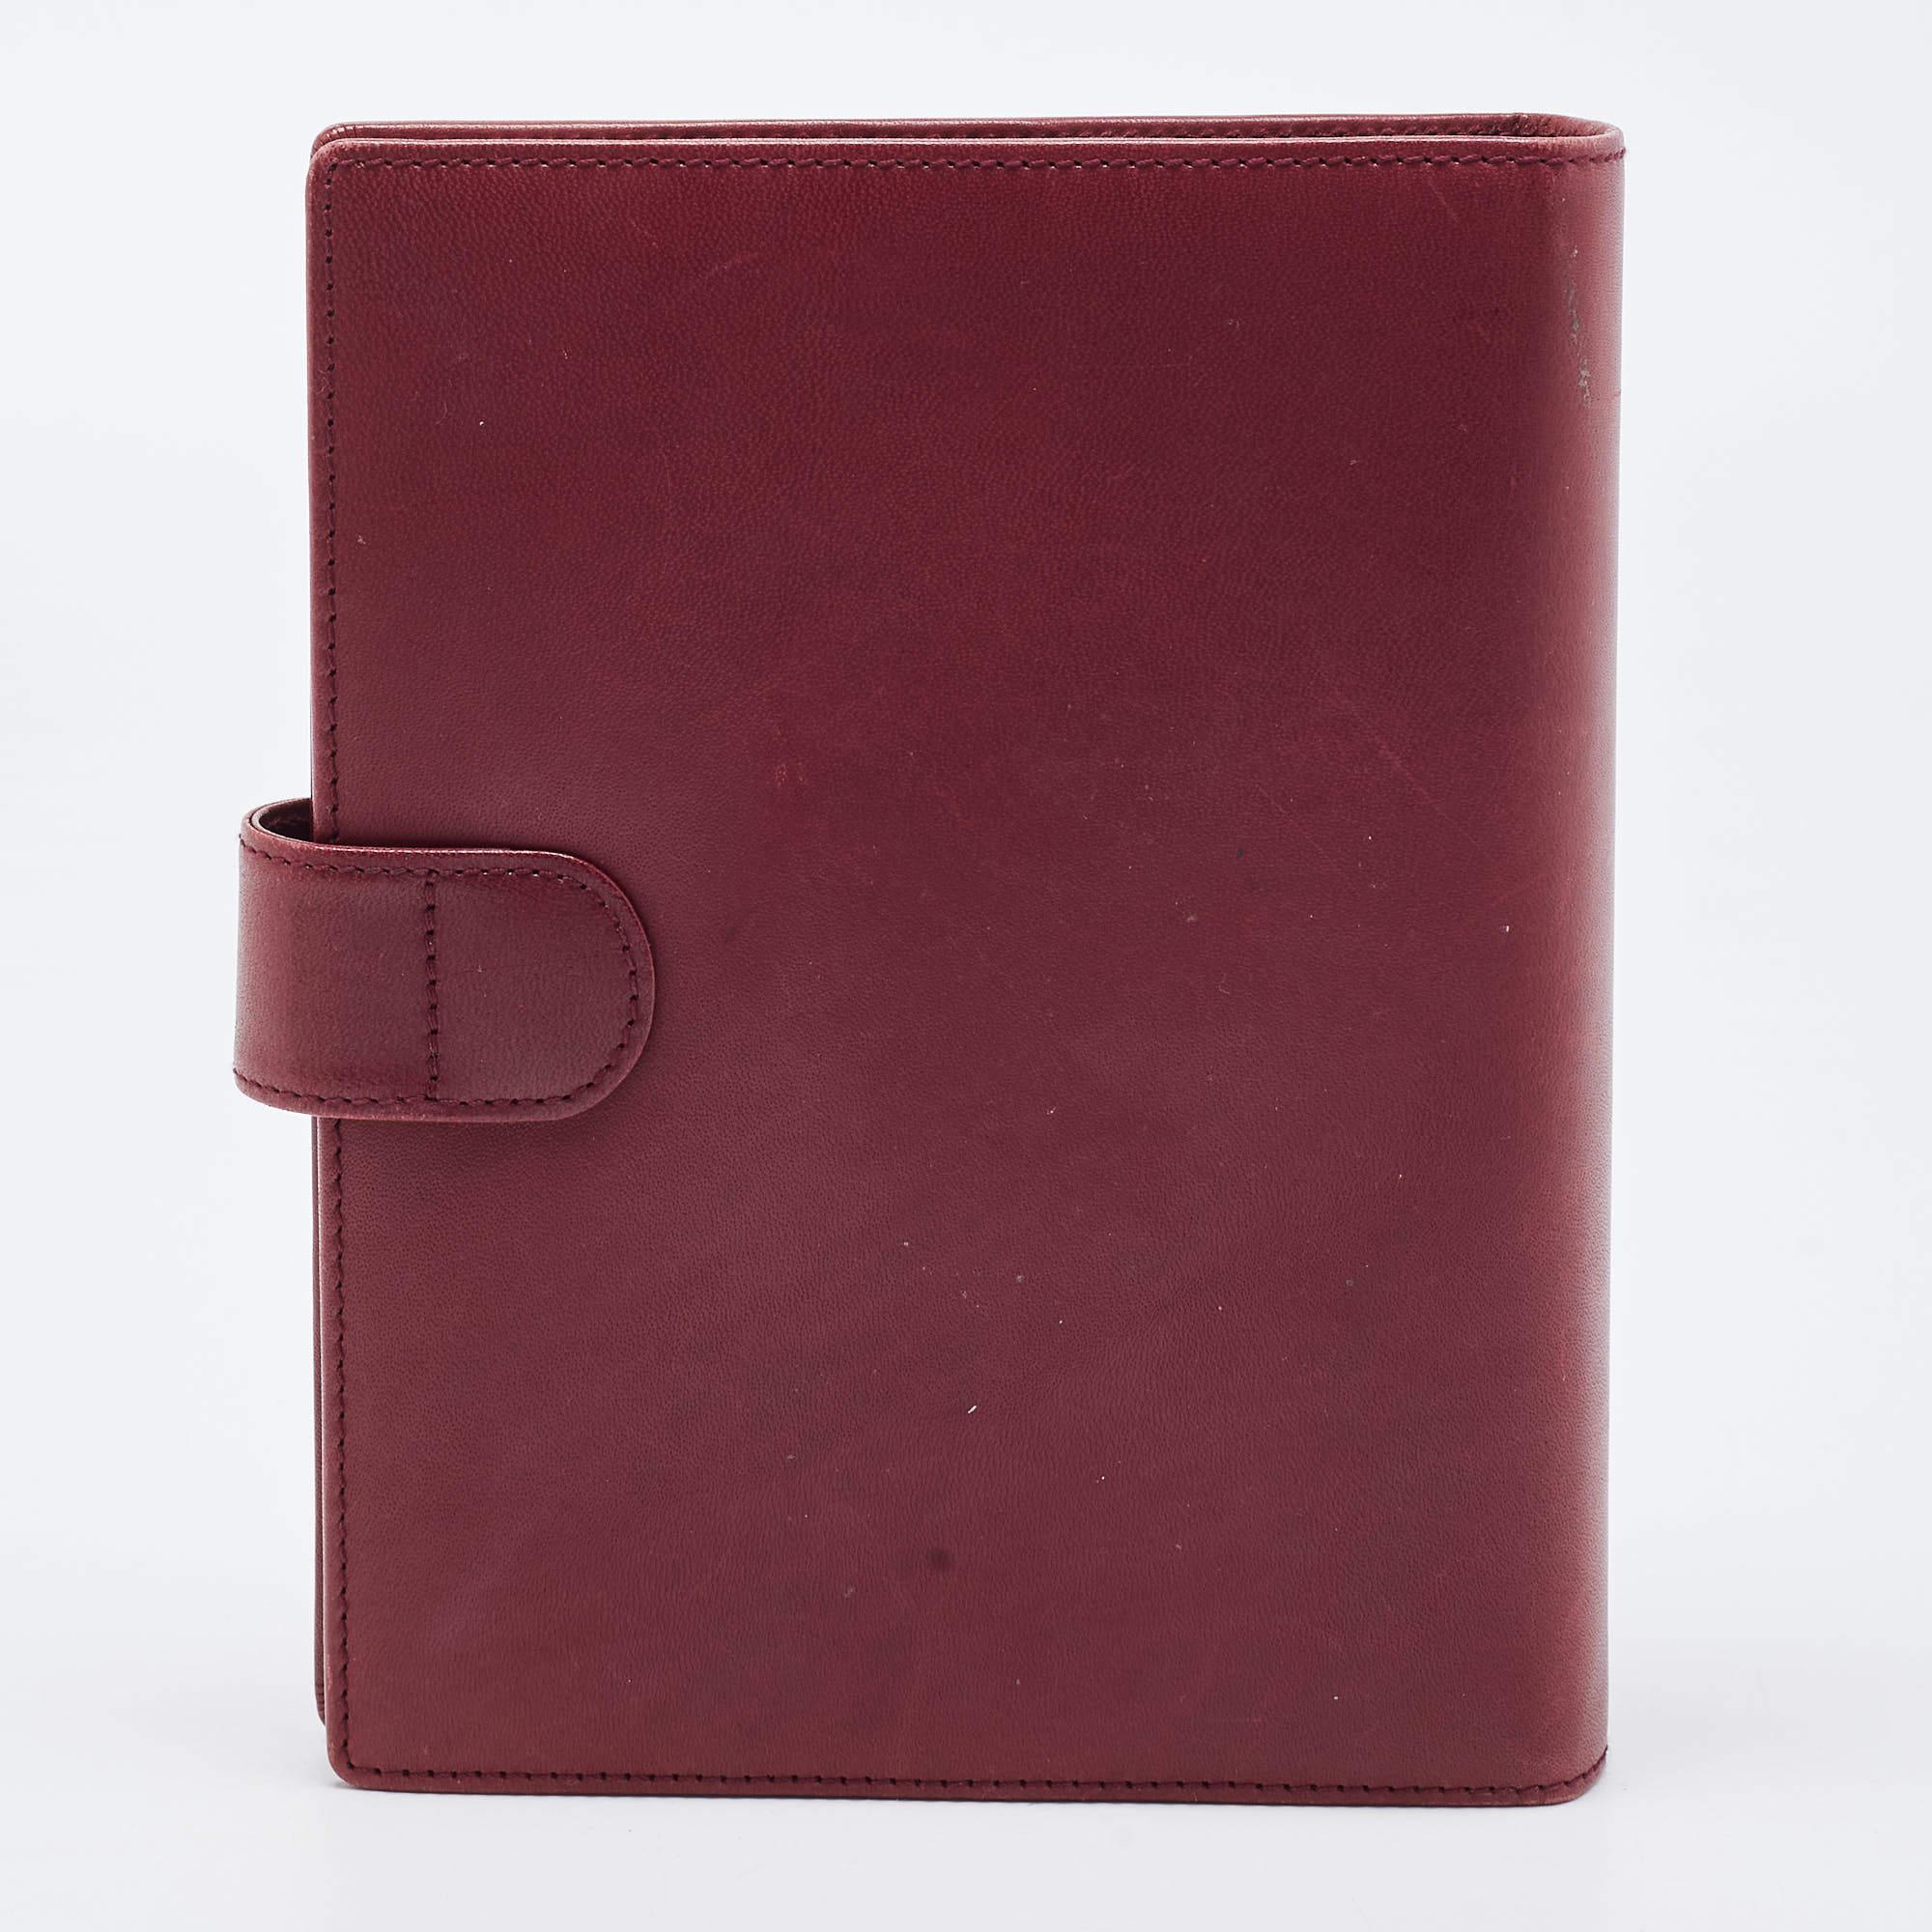 Functional creations like this one from Montblanc are worth the splurge. This Agenda Cover has a burgundy leather exterior and an interior created to neatly house your essentials.

